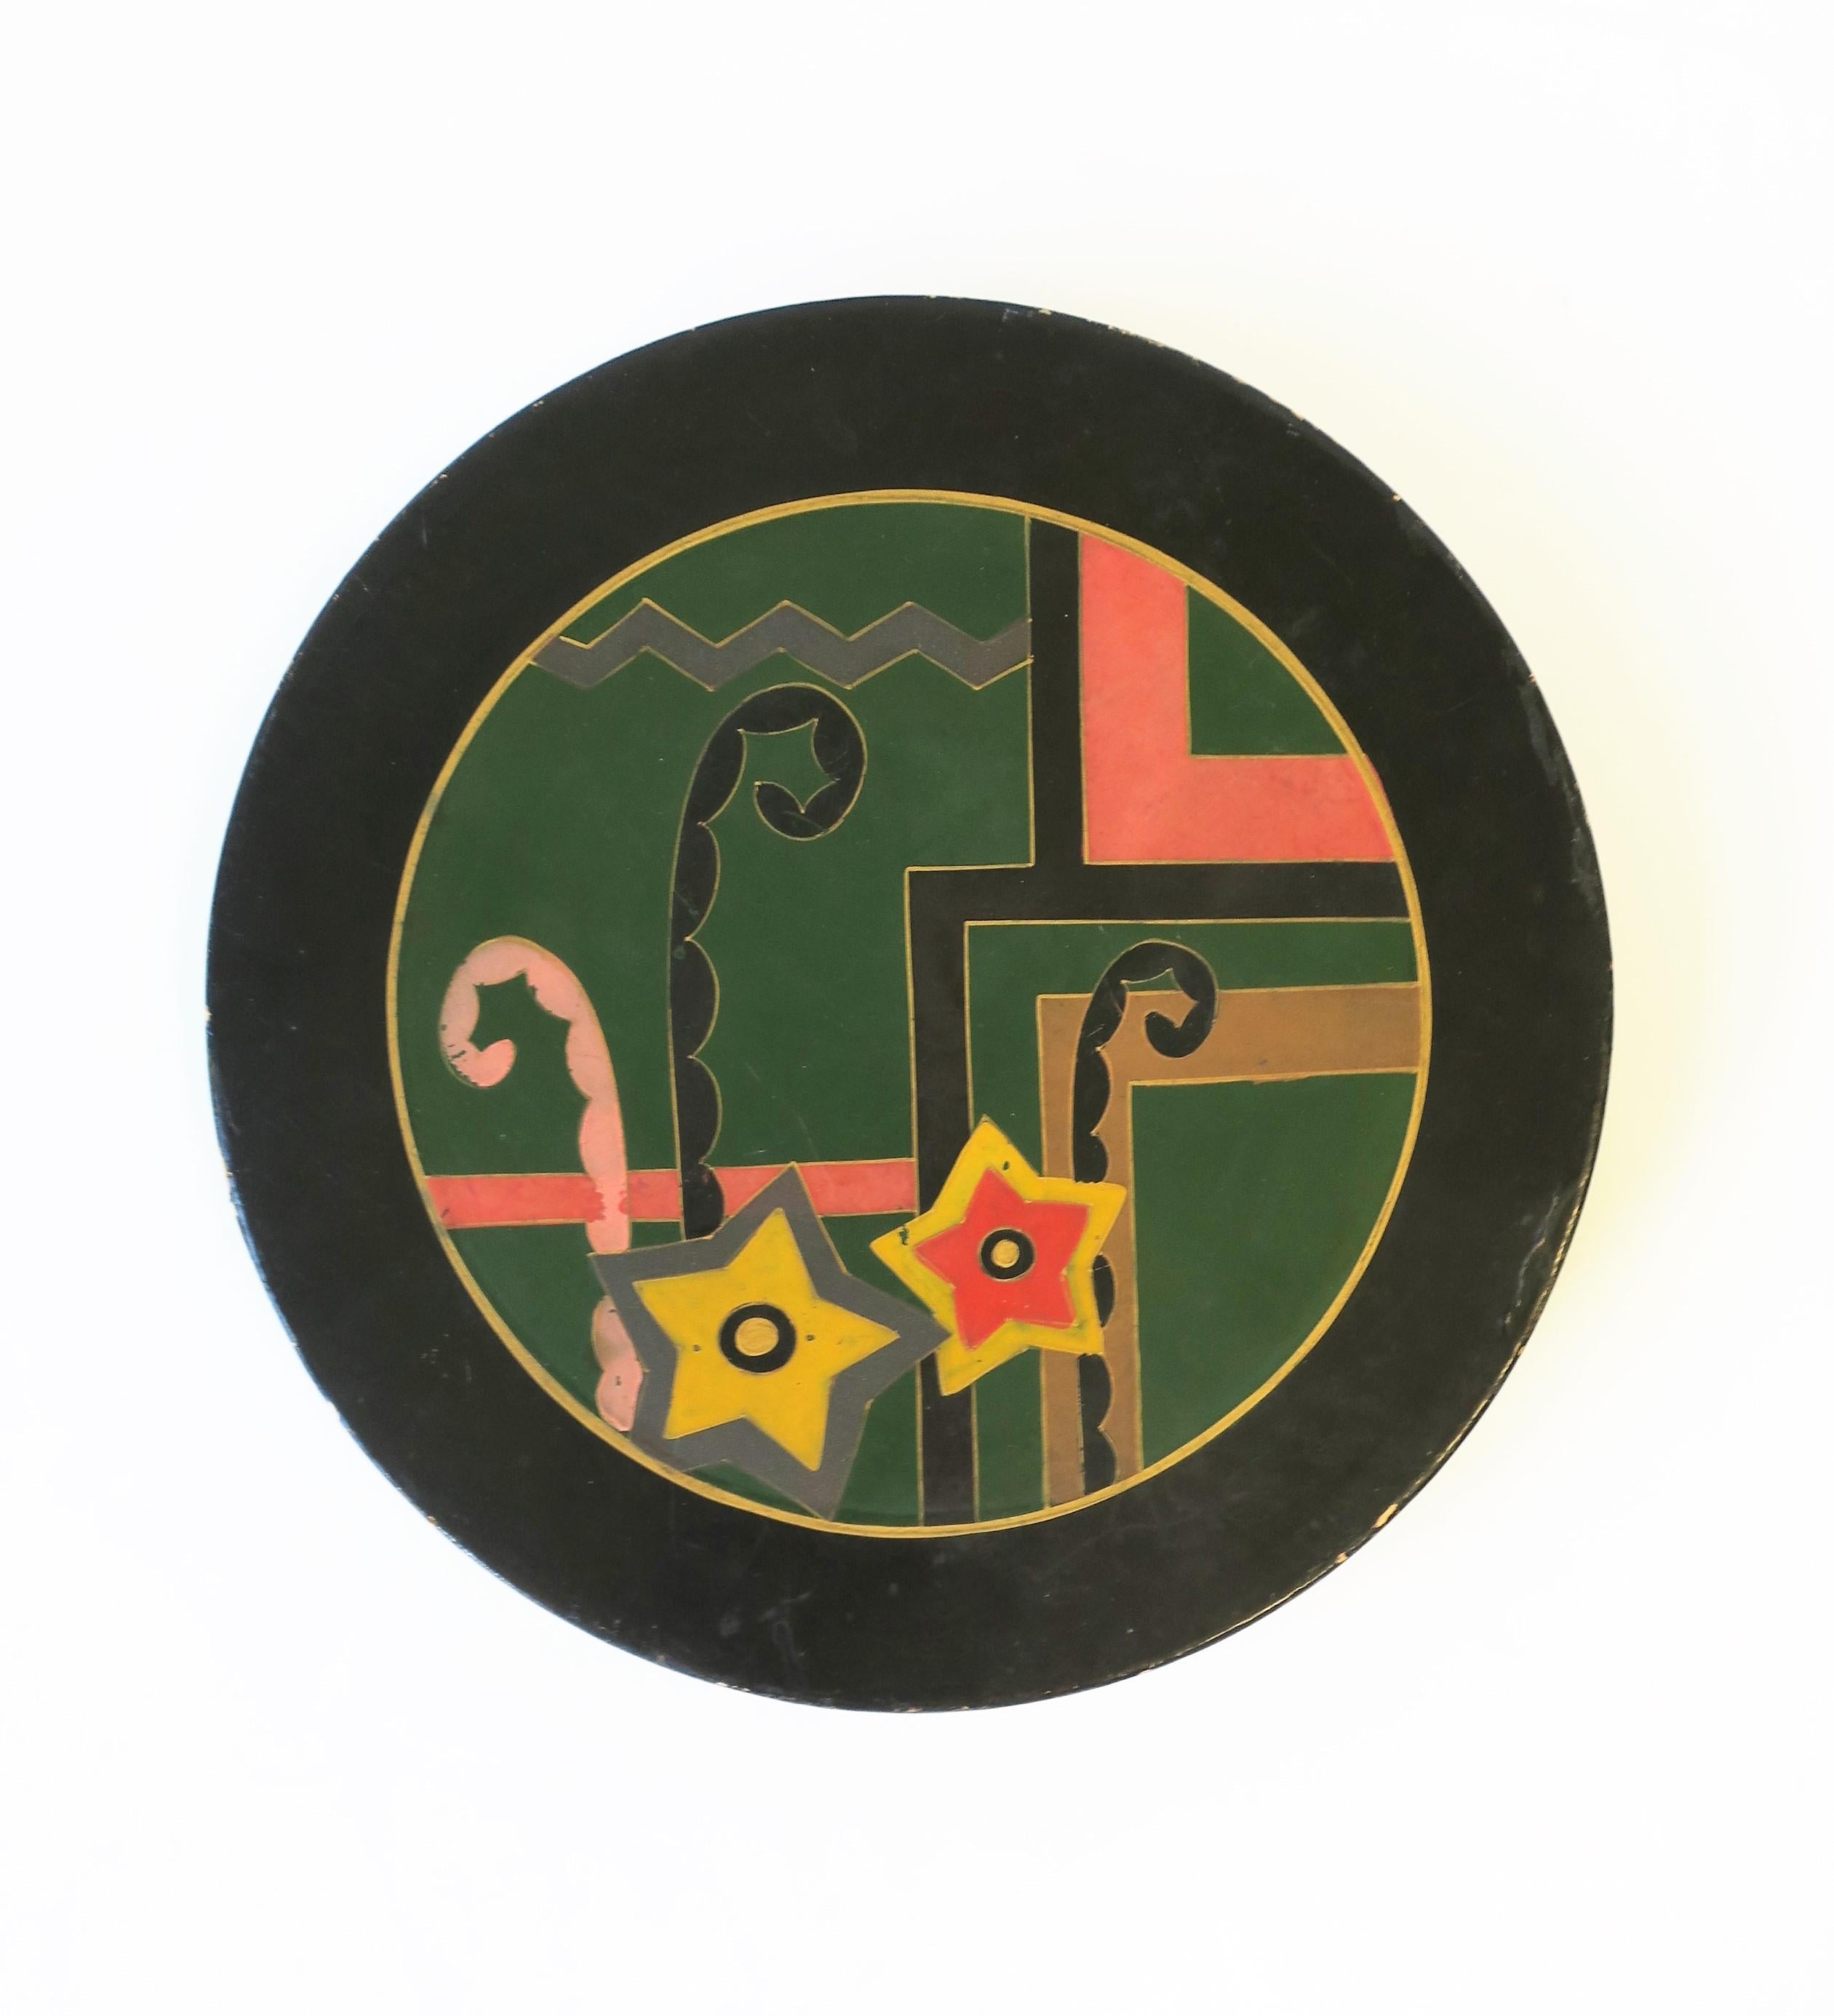 A very beautiful Japanese papier-mâché round box with a colorful geometric design and black lacquer finish, Art Deco period, circa early-20th century, Japan. Marked 